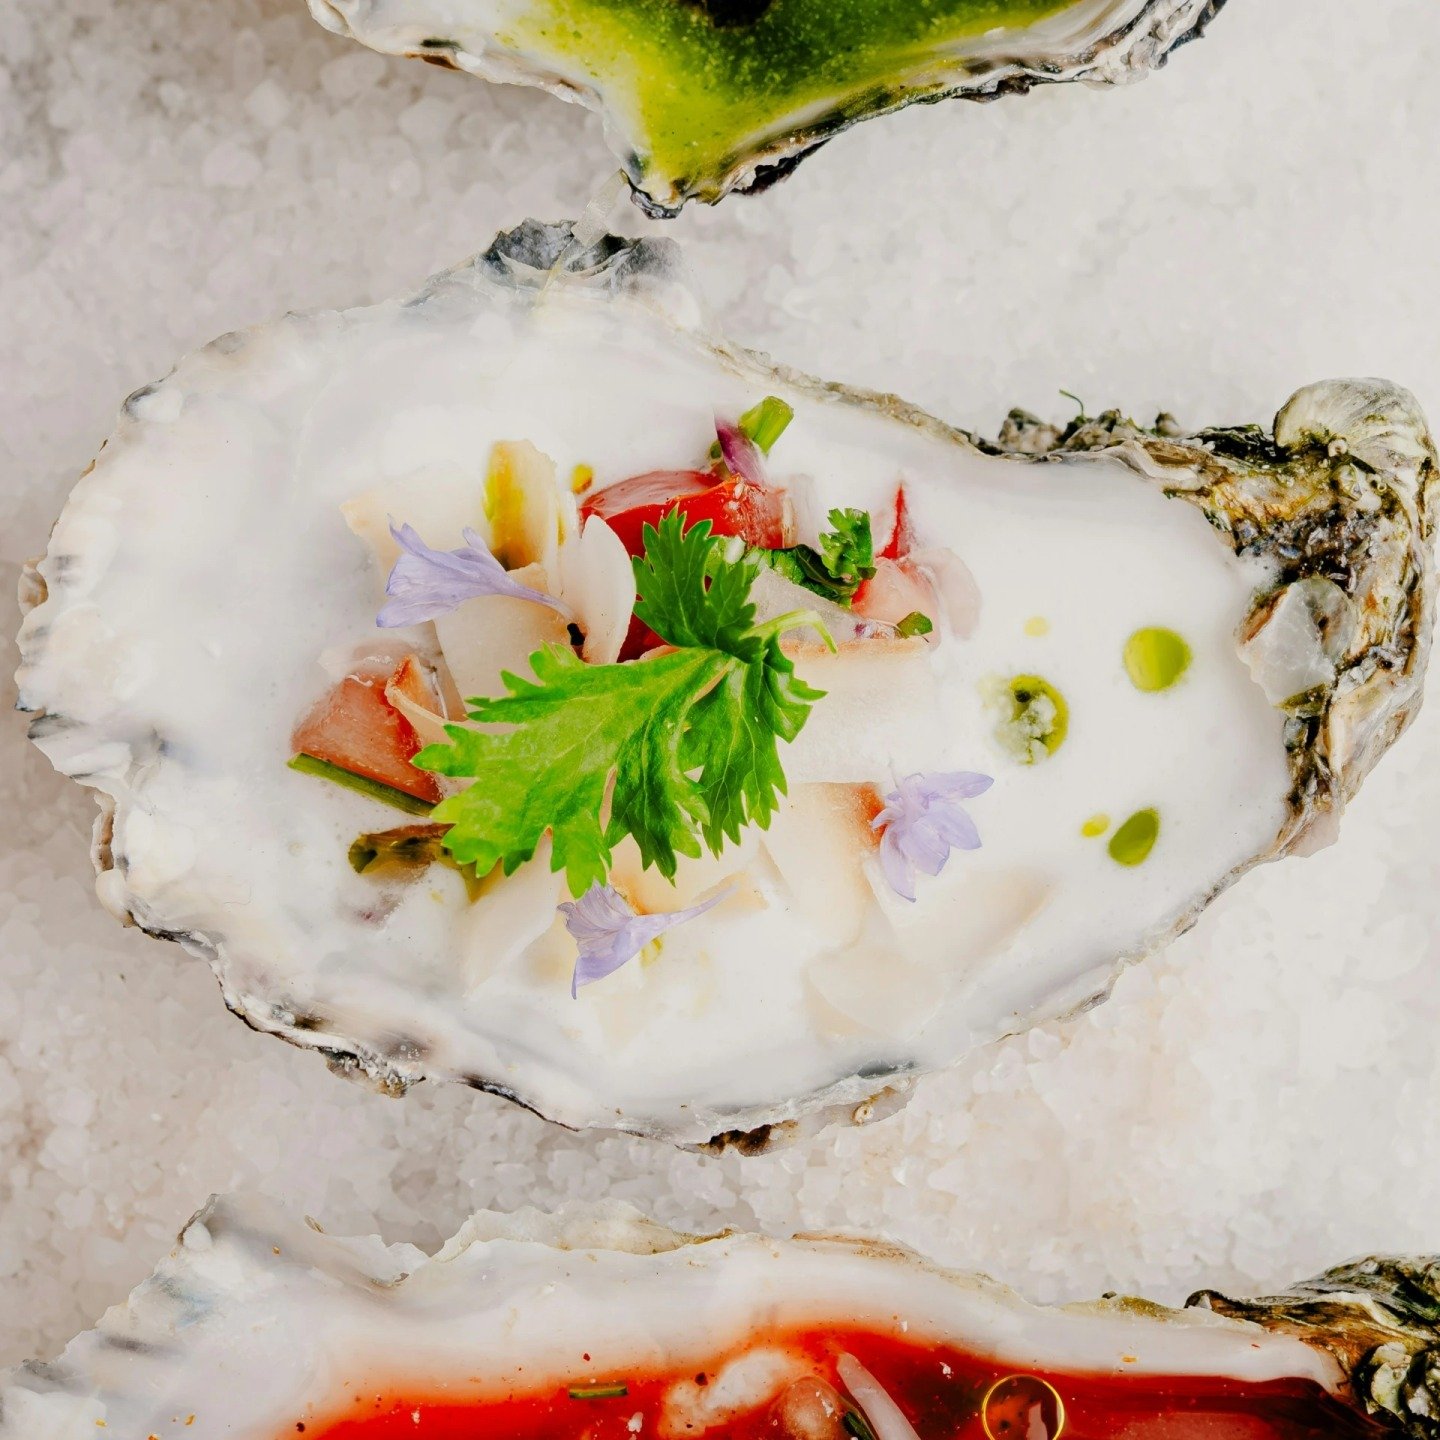 Whether you enjoy them raw on the half shell or prepared in your favorite dish, oysters offer a taste of coastal elegance that's simply irresistible.

So, treat yourself to the ultimate seafood experience and let the freshness of oysters transport yo